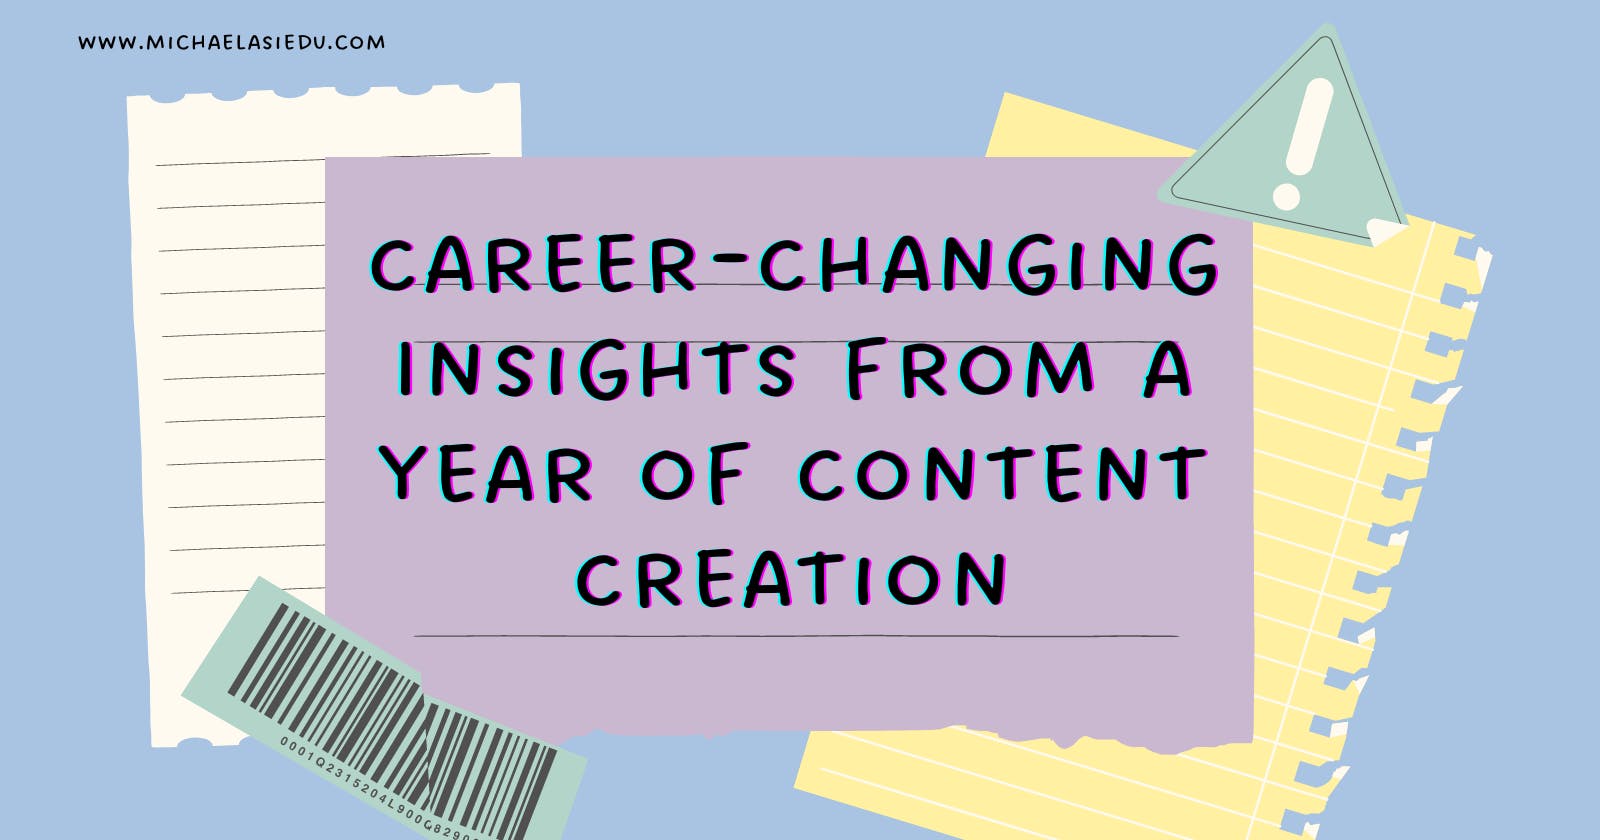 Career-Changing Insights from a Year of Content Creation